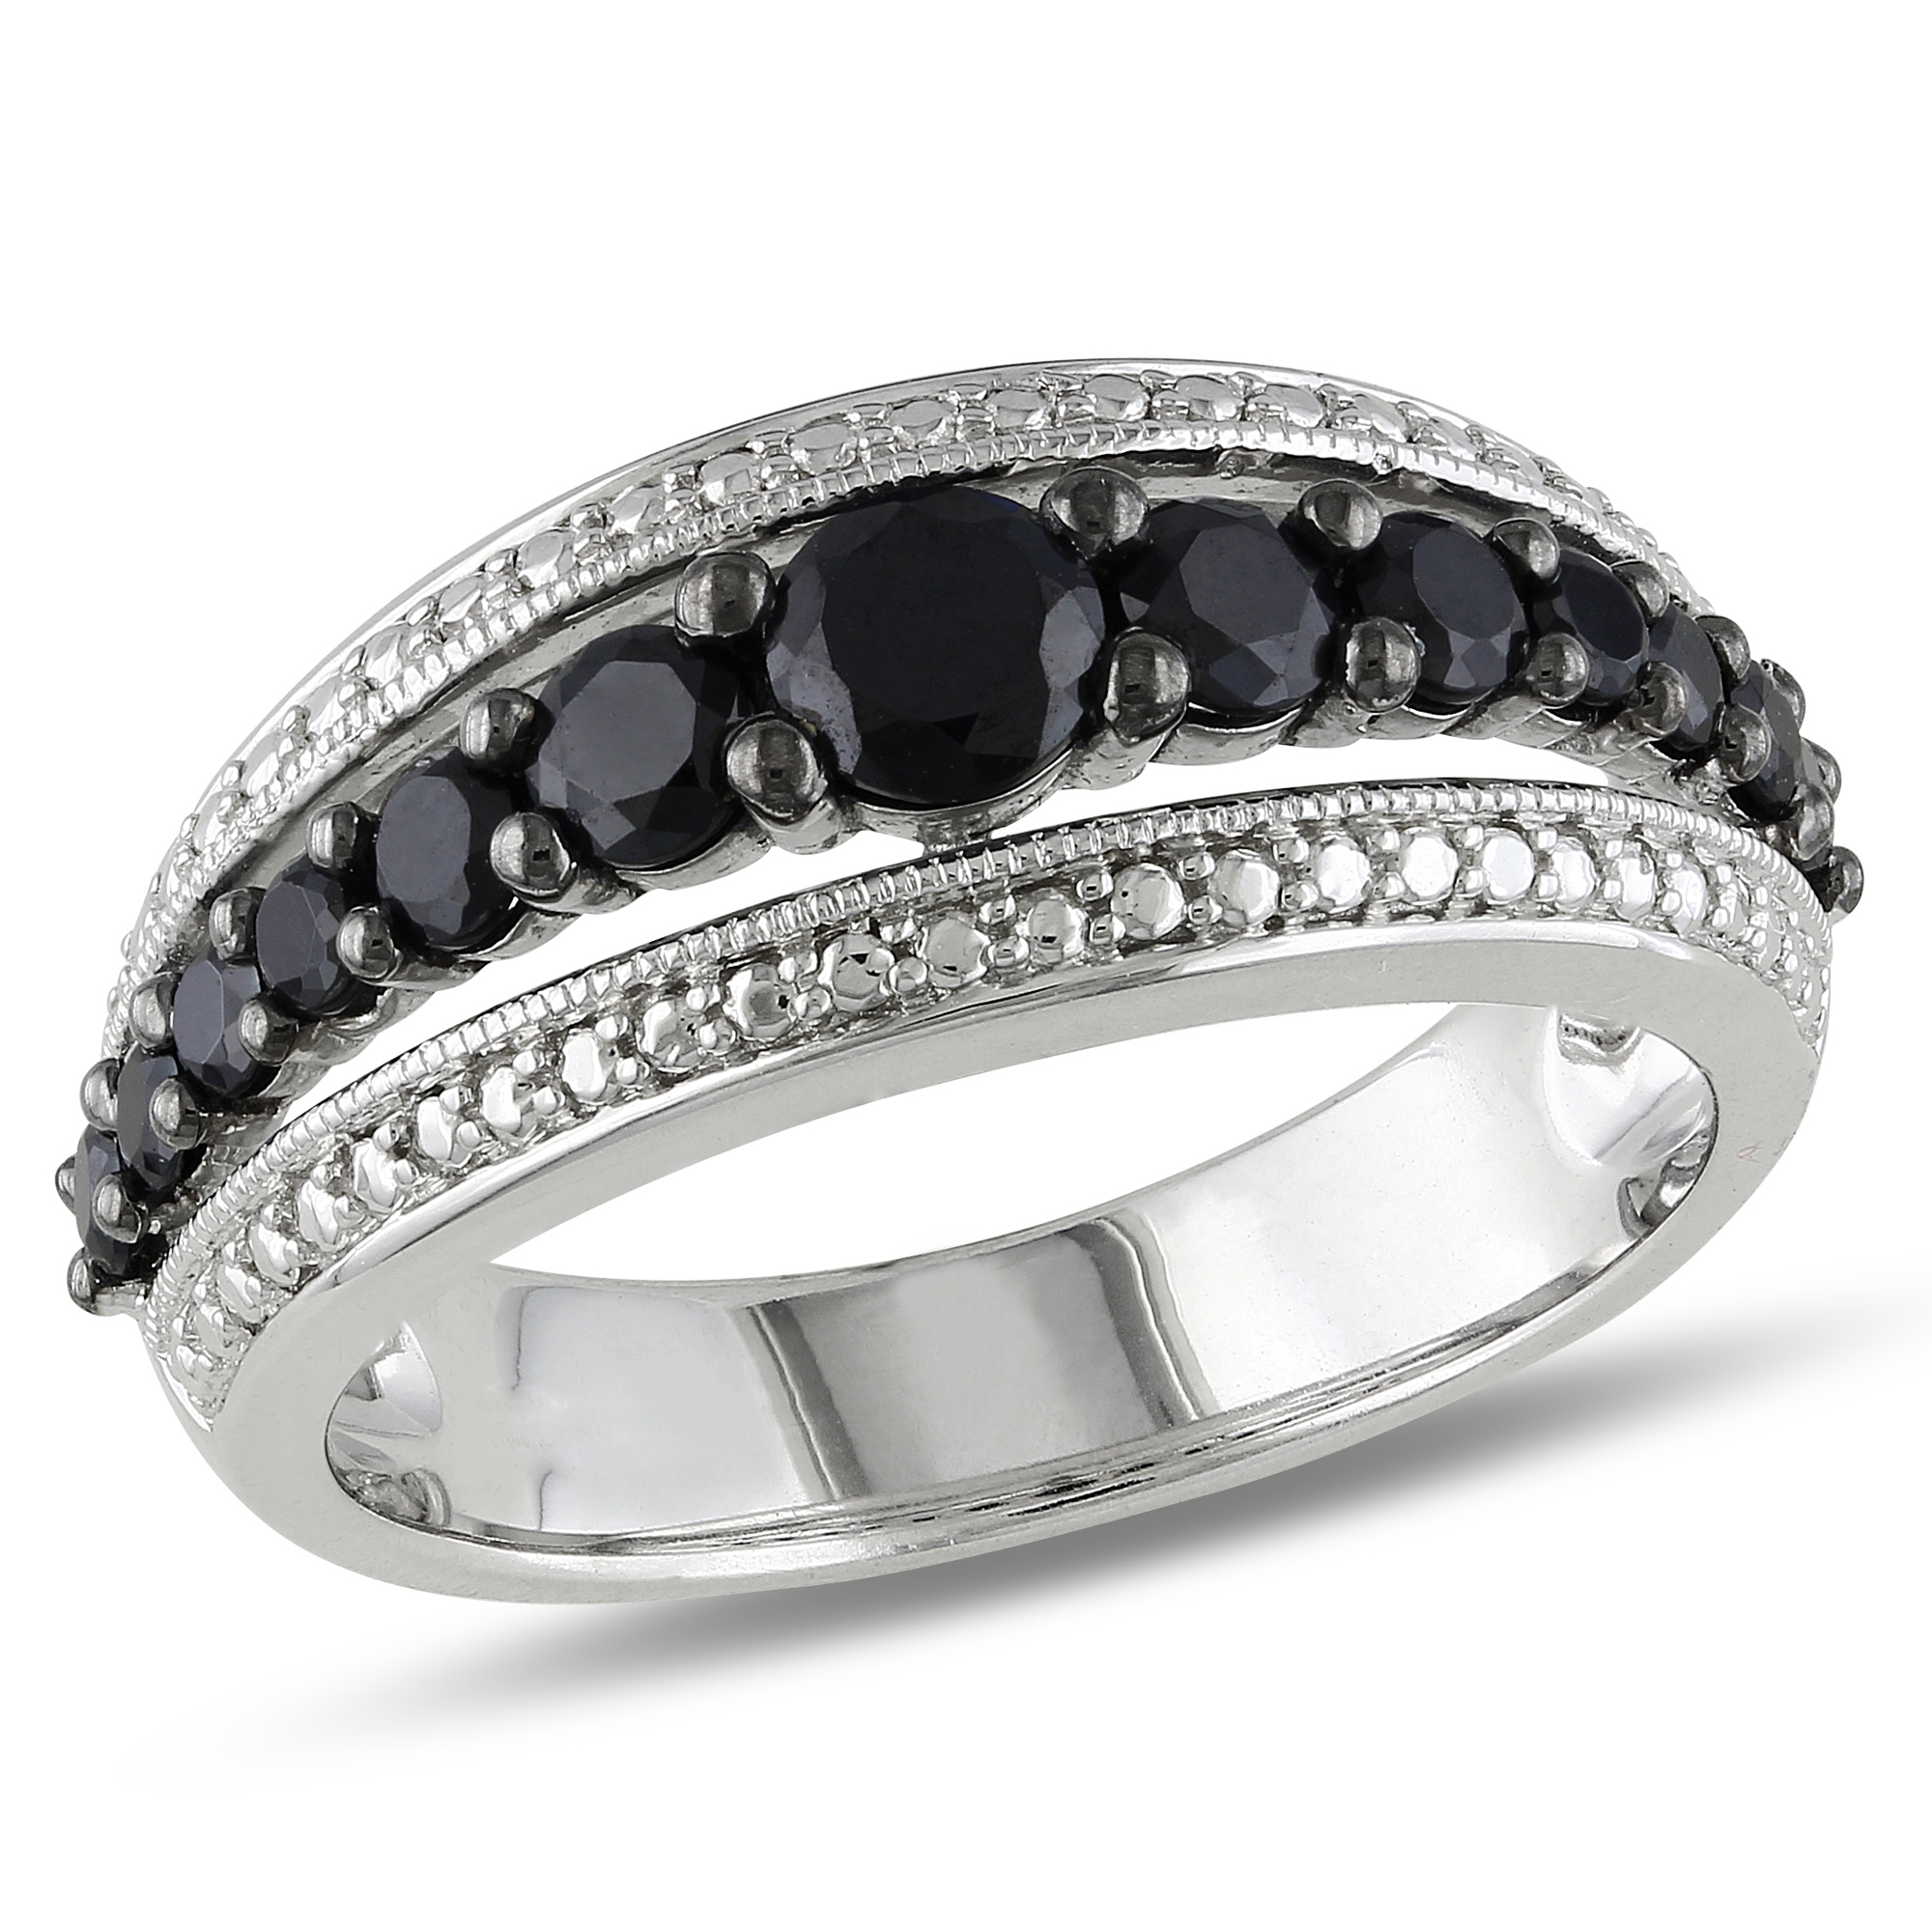 1 Carat T.G.W. Black Spinel Fashion Ring in Sterling Silver Black Plated